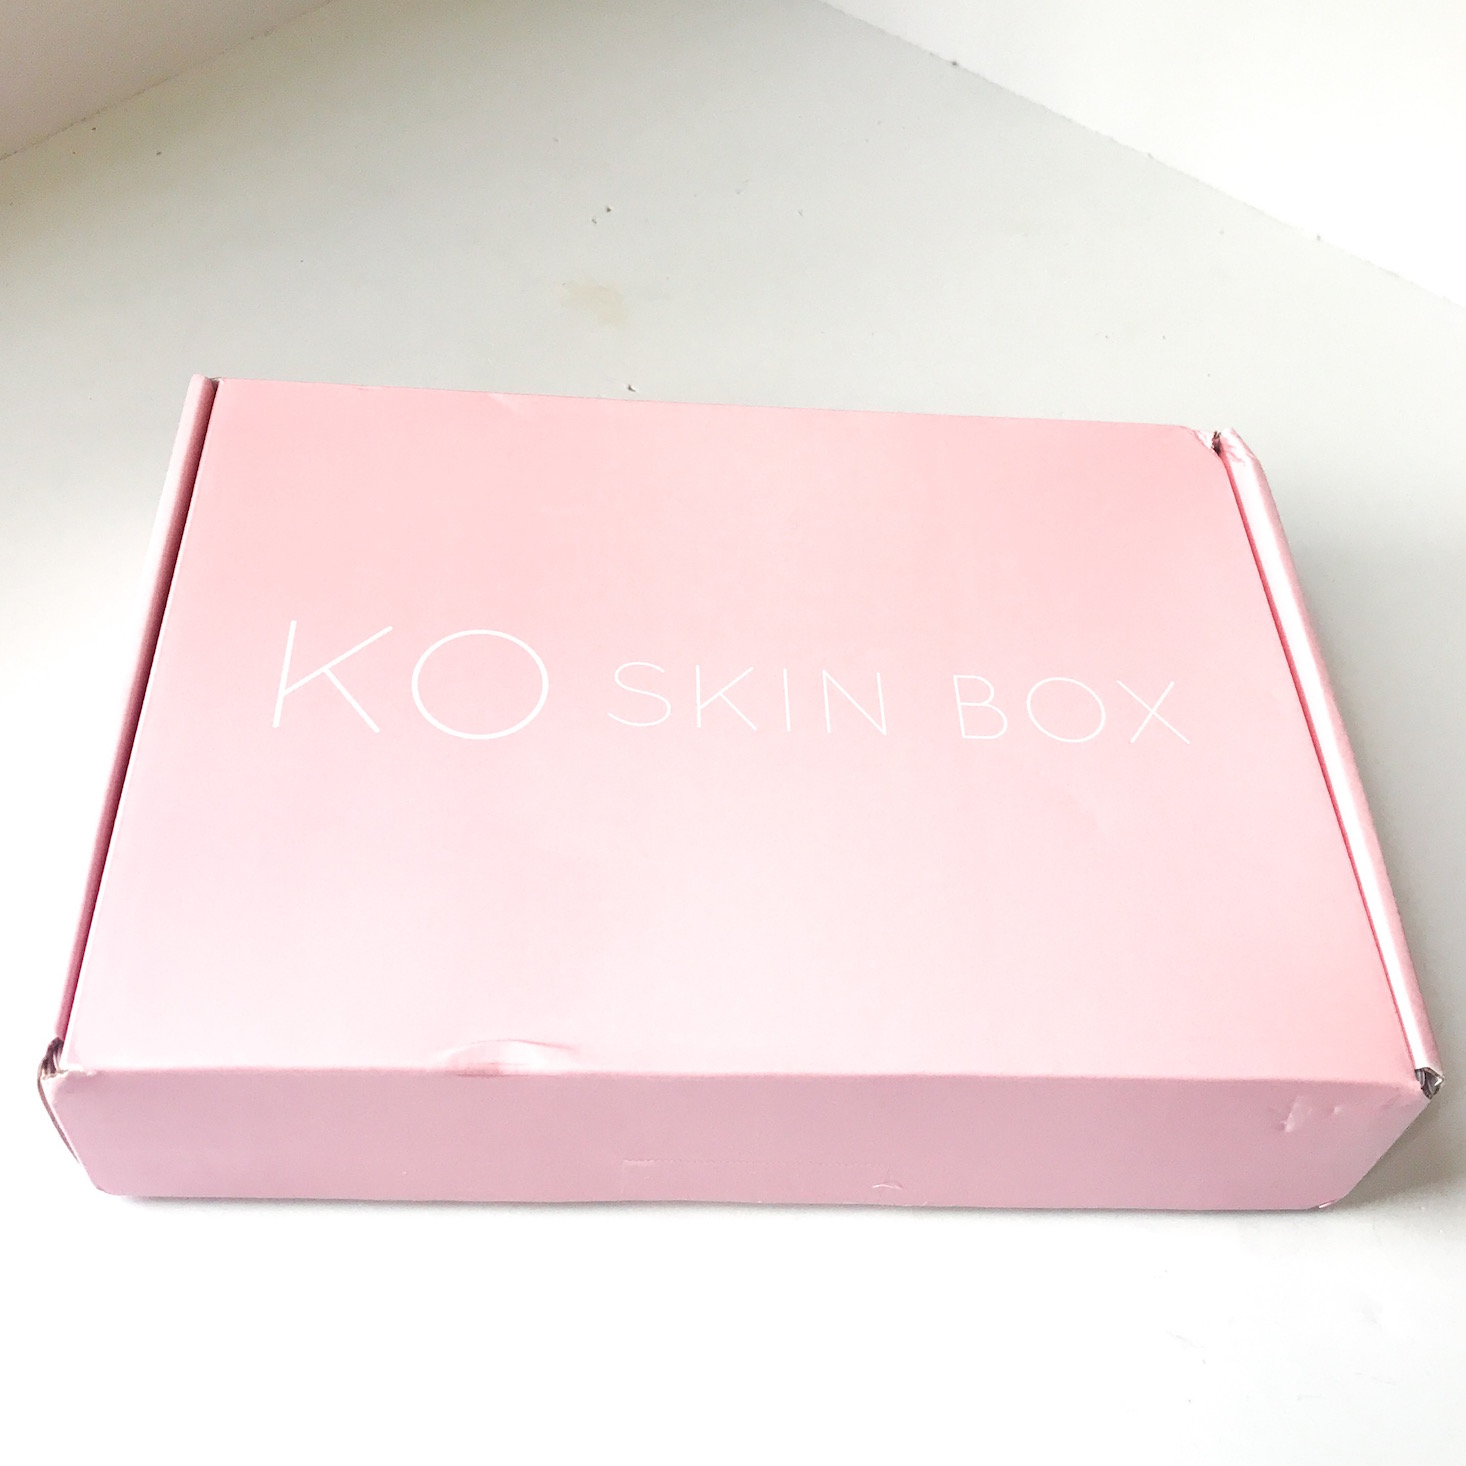 Ko Skin Beauty Box Review + Coupon – March 2018